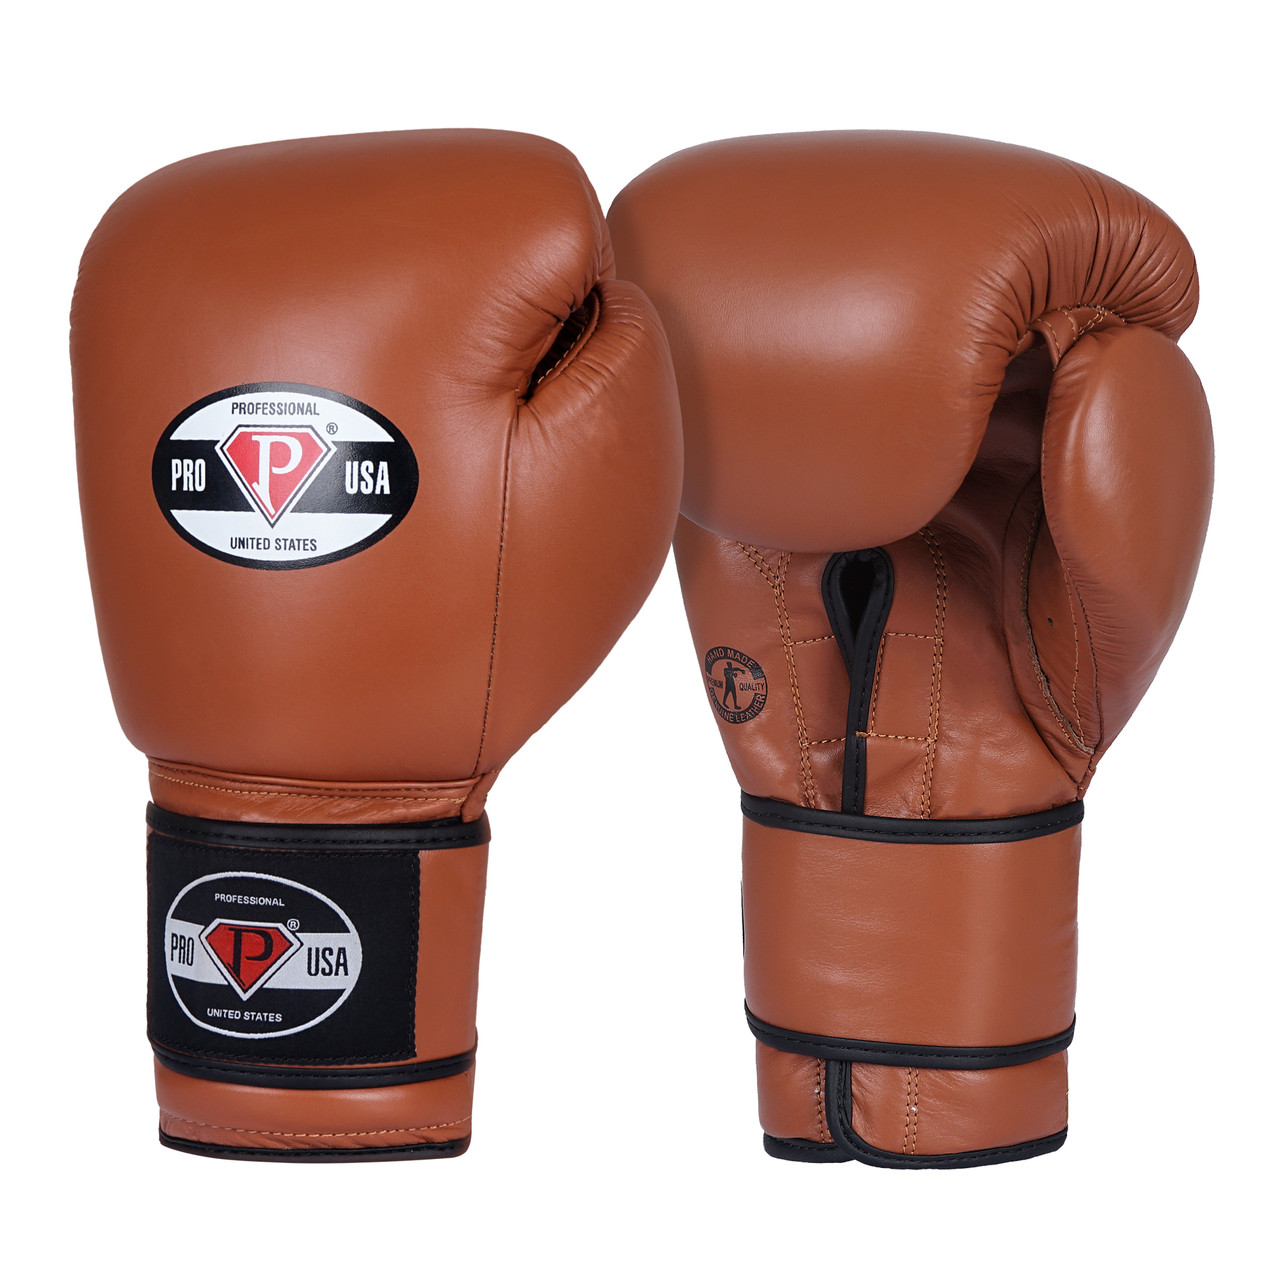 https://cdn11.bigcommerce.com/s-z0t16zhhlt/images/stencil/1280x1280/products/175/498/Professional_Hook-N-Loop_Boxing_Gloves__06413.1702606596.jpg?c=1